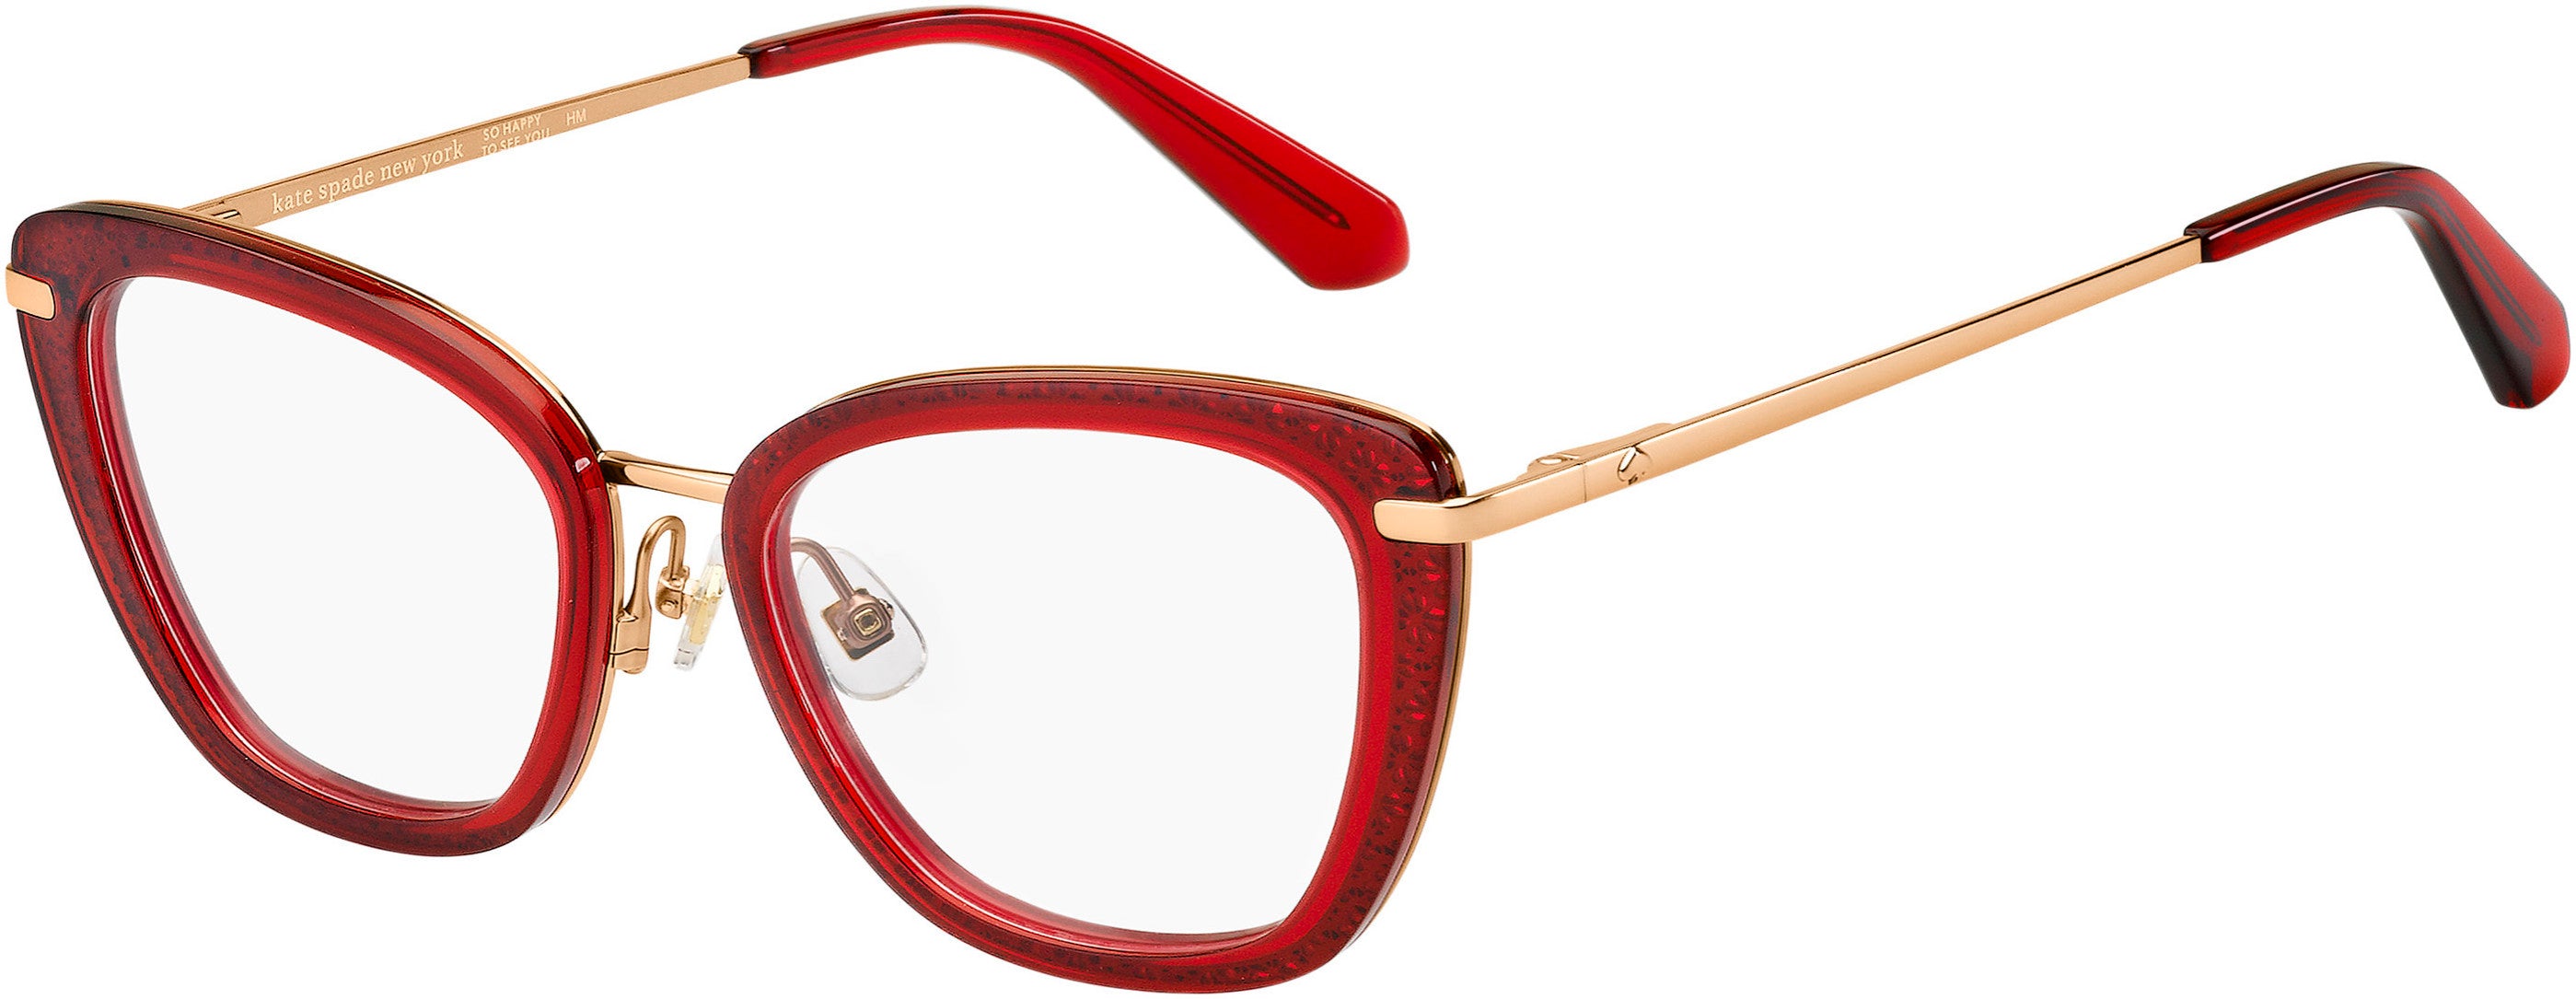 Kate Spade Madeira/G Cat Eye/butterfly Eyeglasses 0C9A-0C9A  Red (00 Demo Lens)